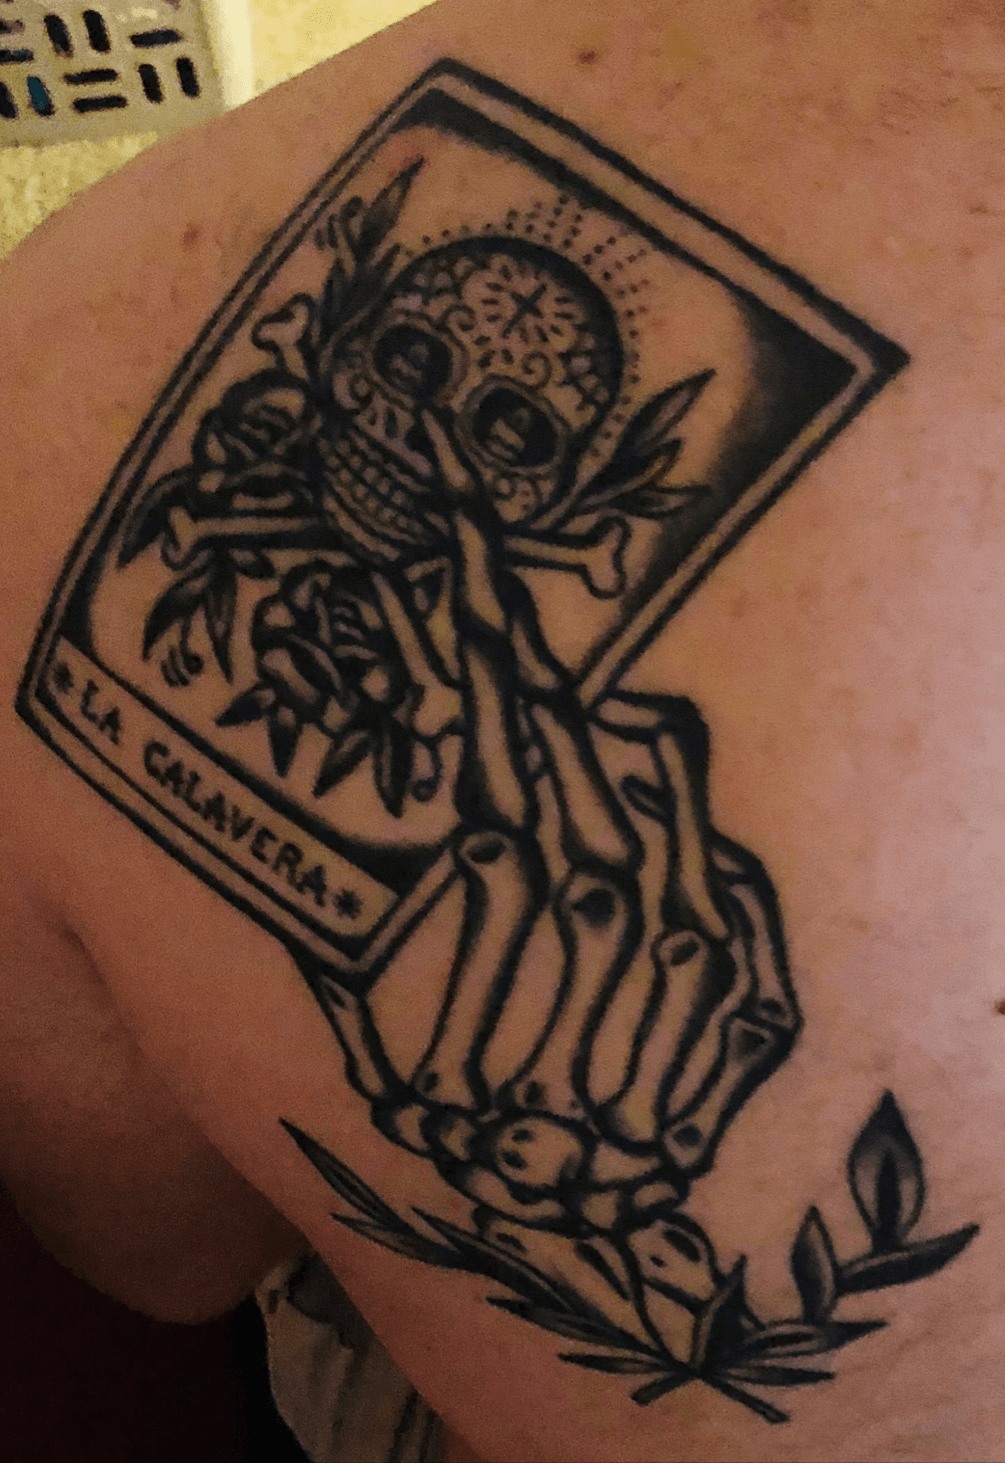 Tattoo uploaded by Cesar Duarte • This one I got while I was in Rota,  Spain. It is a Loteria card with a skeleton hand holding it. I got this one  because